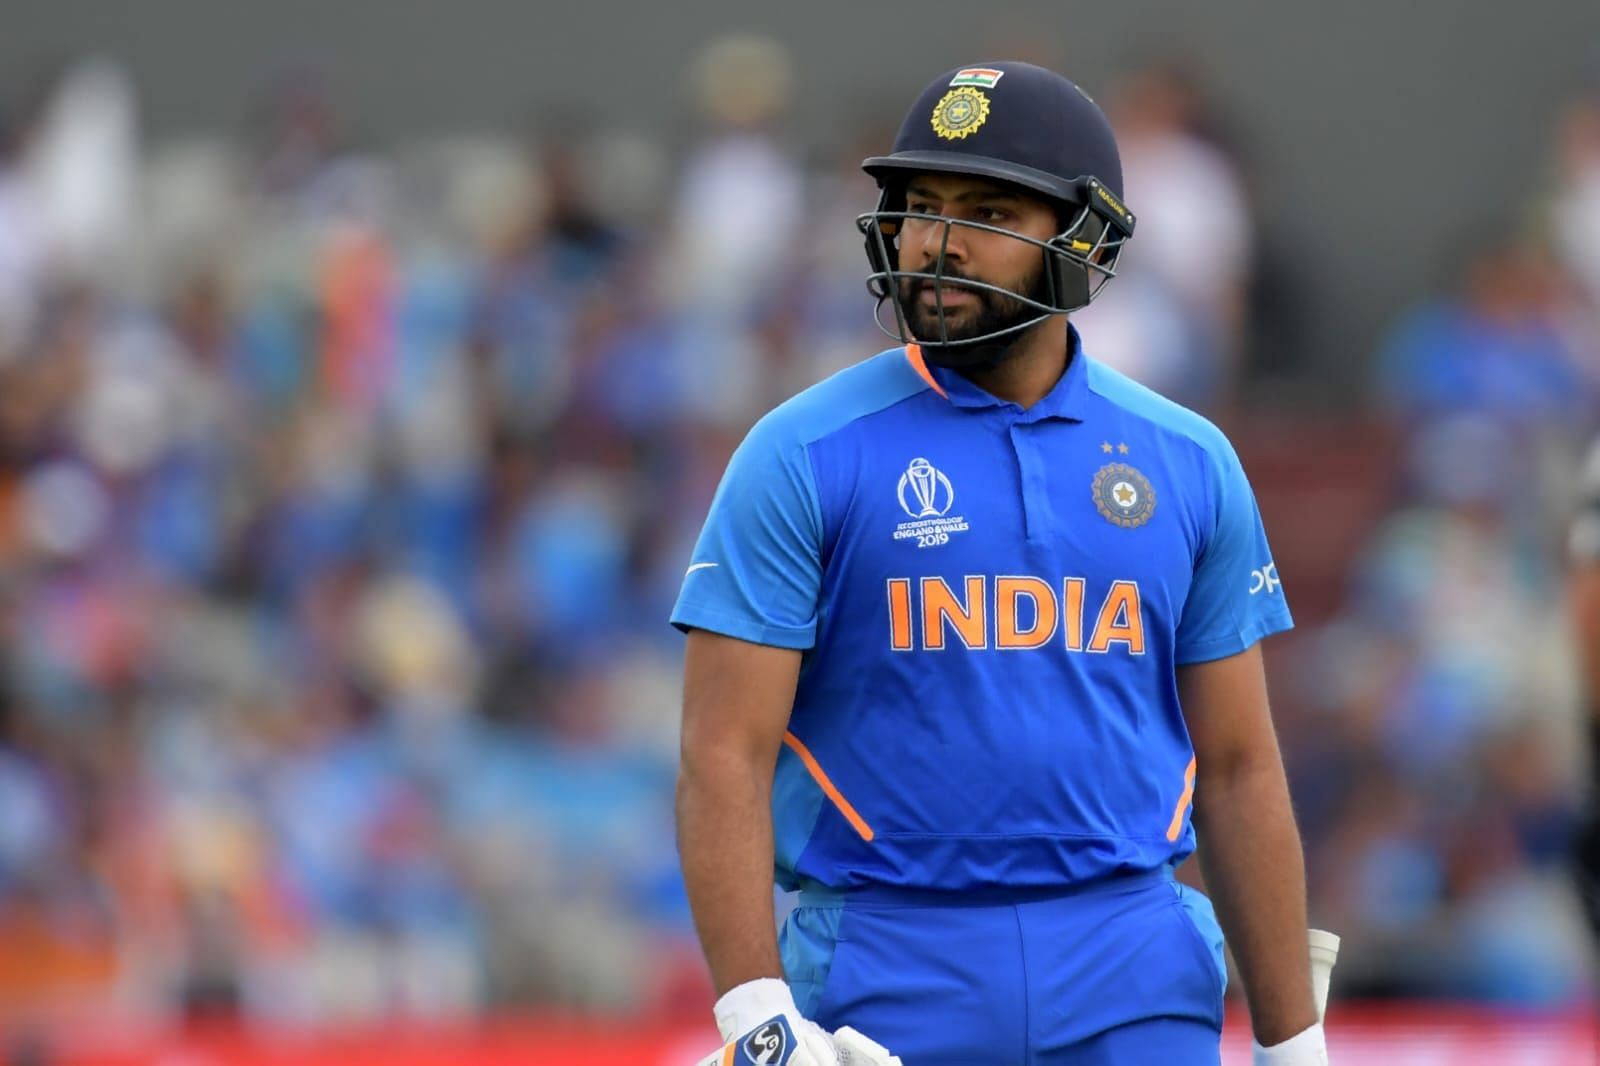 Rohit Sharma has struggled so far in the World Cup. [Pic Credit - ICC]